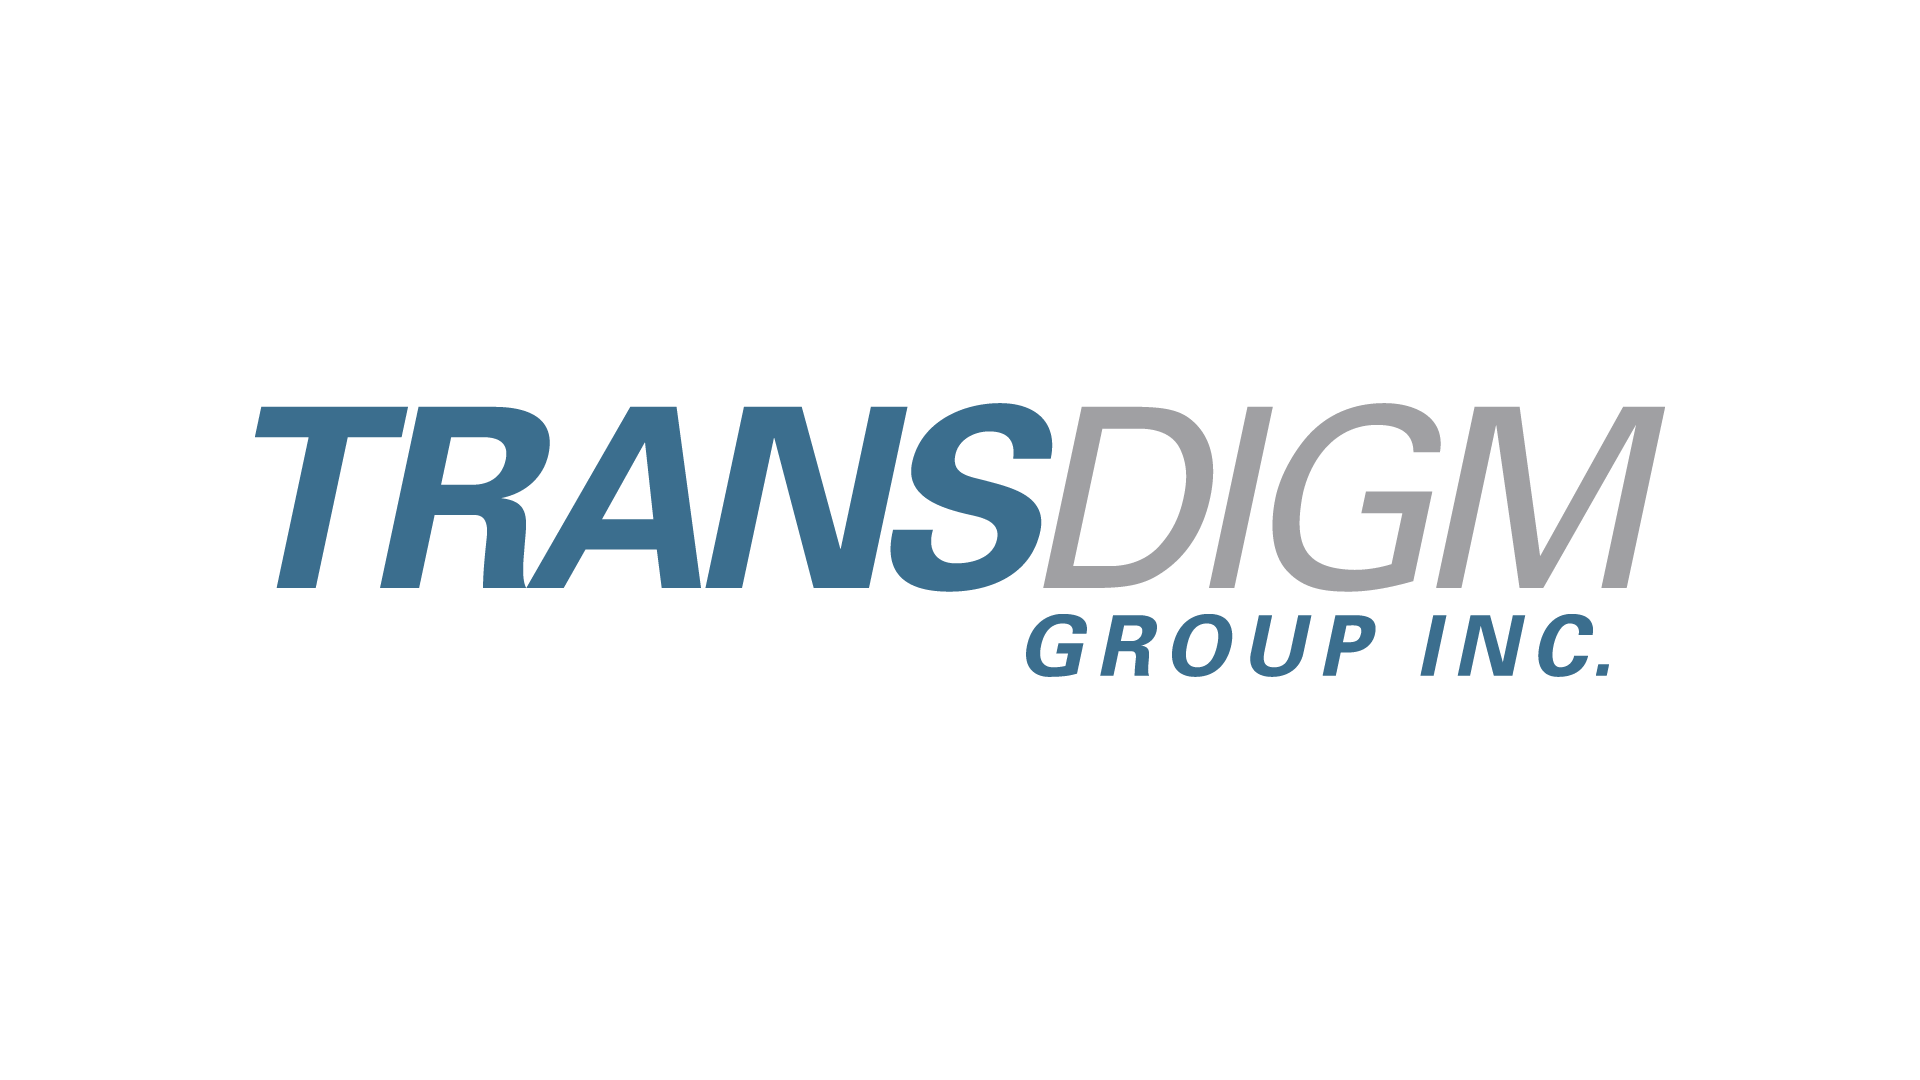 TransDigm Group Incorporated (NYSE: TDG) announced today that it has comple...